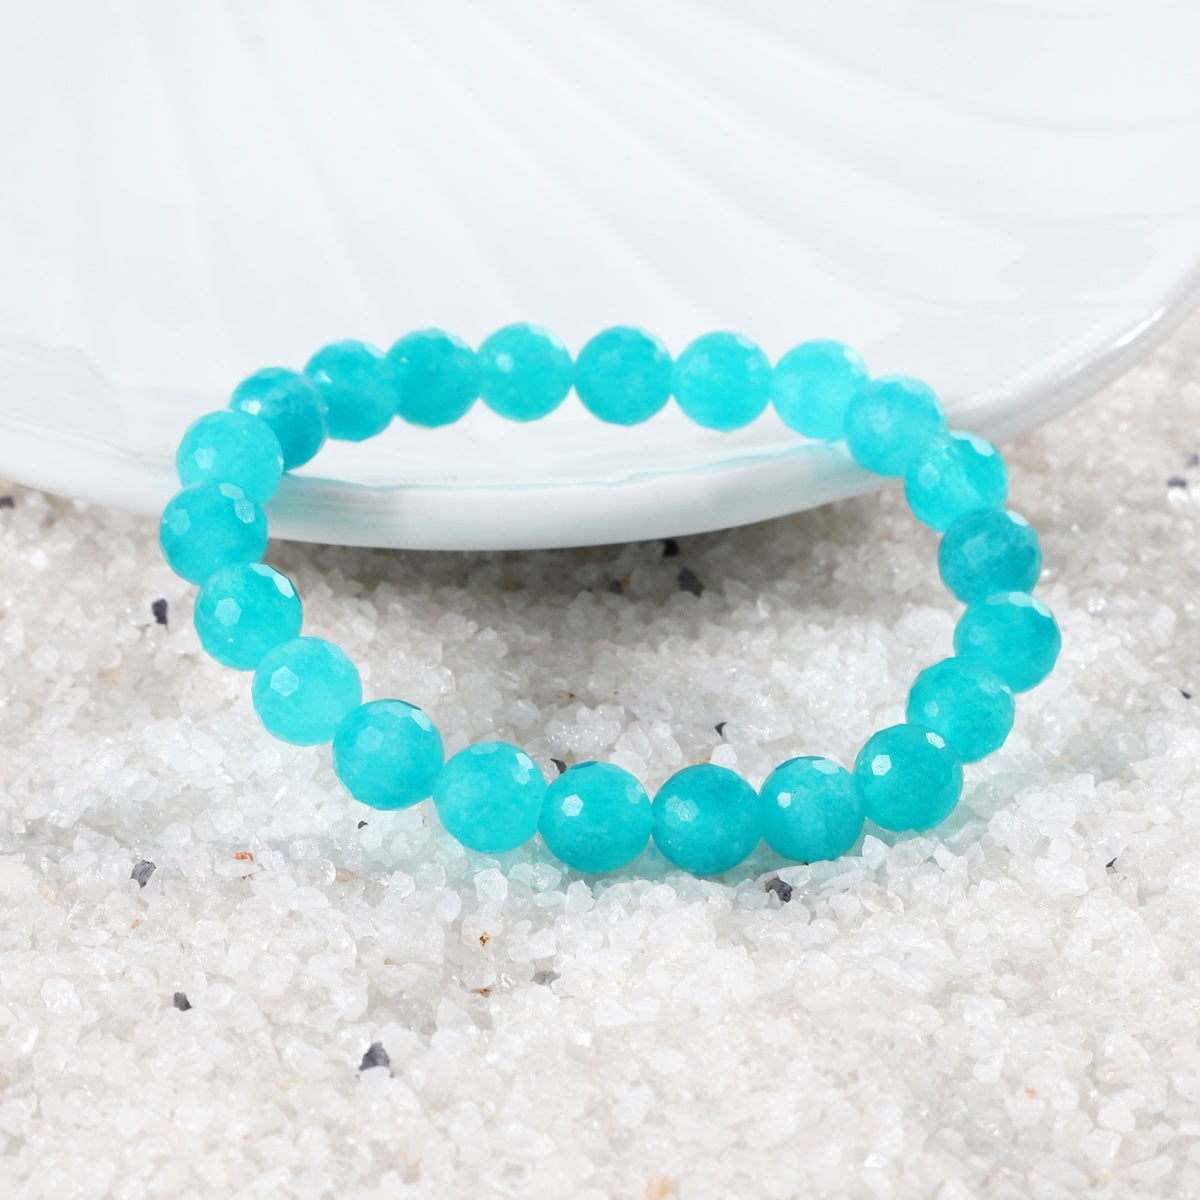 Faceted round Sky Blue Quartz stones in the bracelet, reflecting light and adding elegance to your ensemble